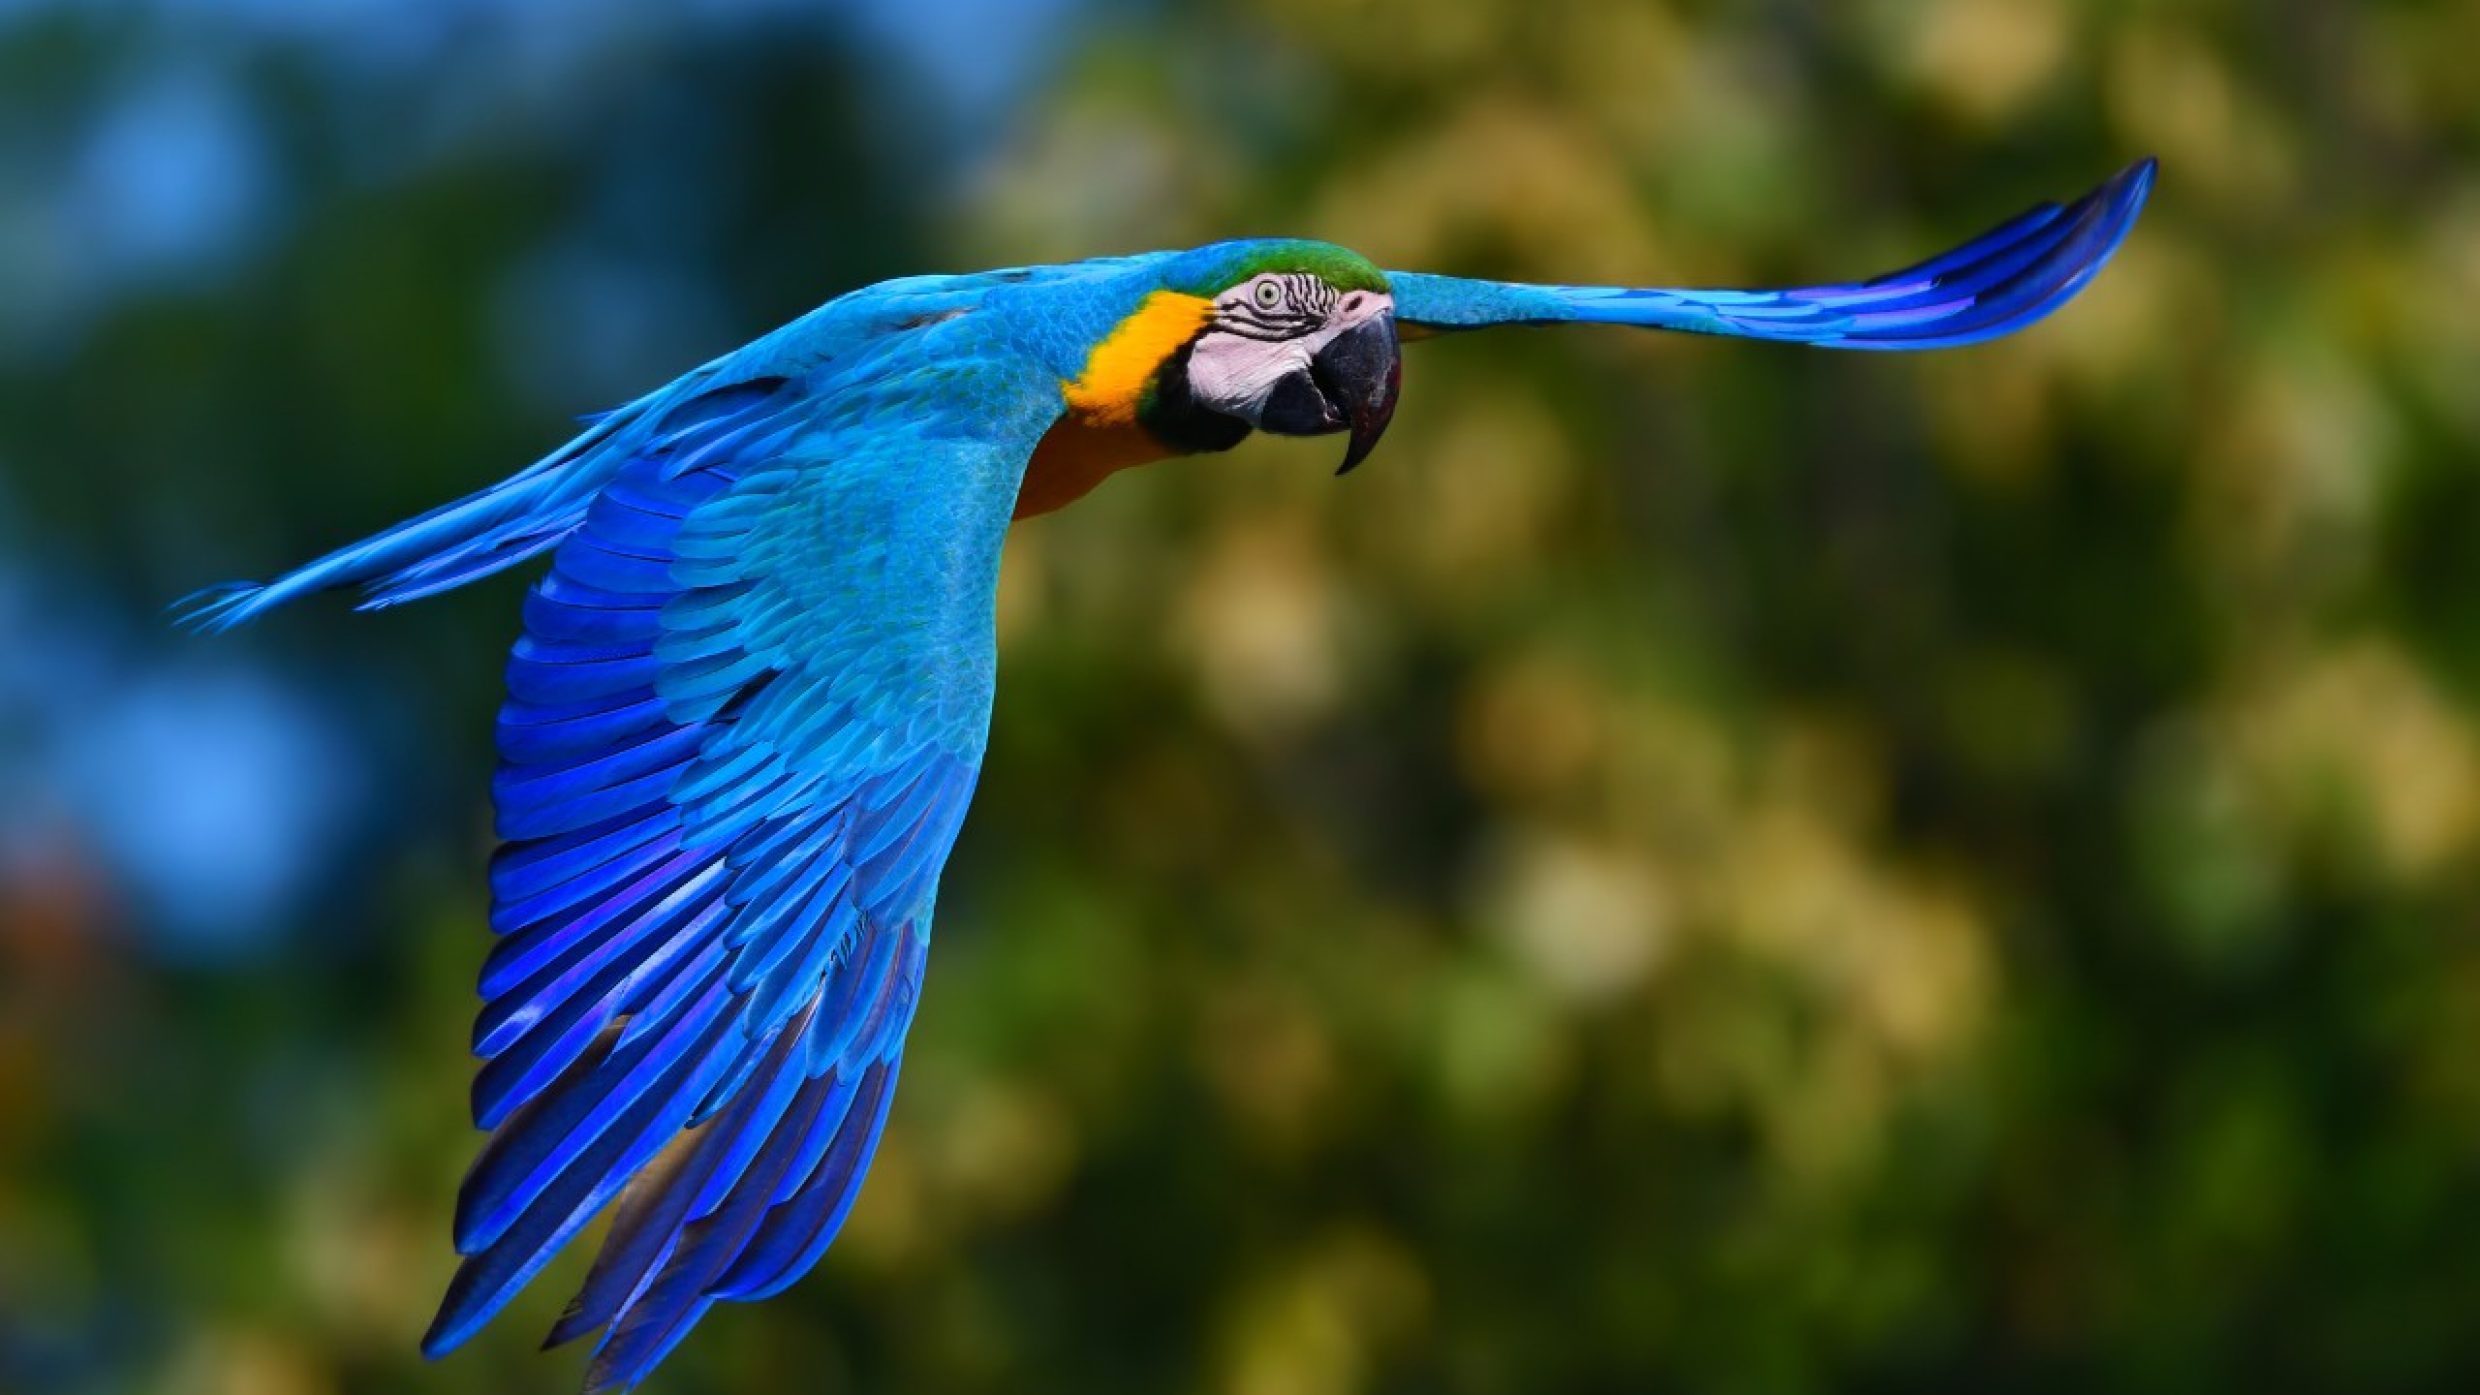 Parrots are the only birds that can live longer than people, with a life expectancy of up to 100 years. The oldest blue and yellow macaw on record even lived to 104 in England.